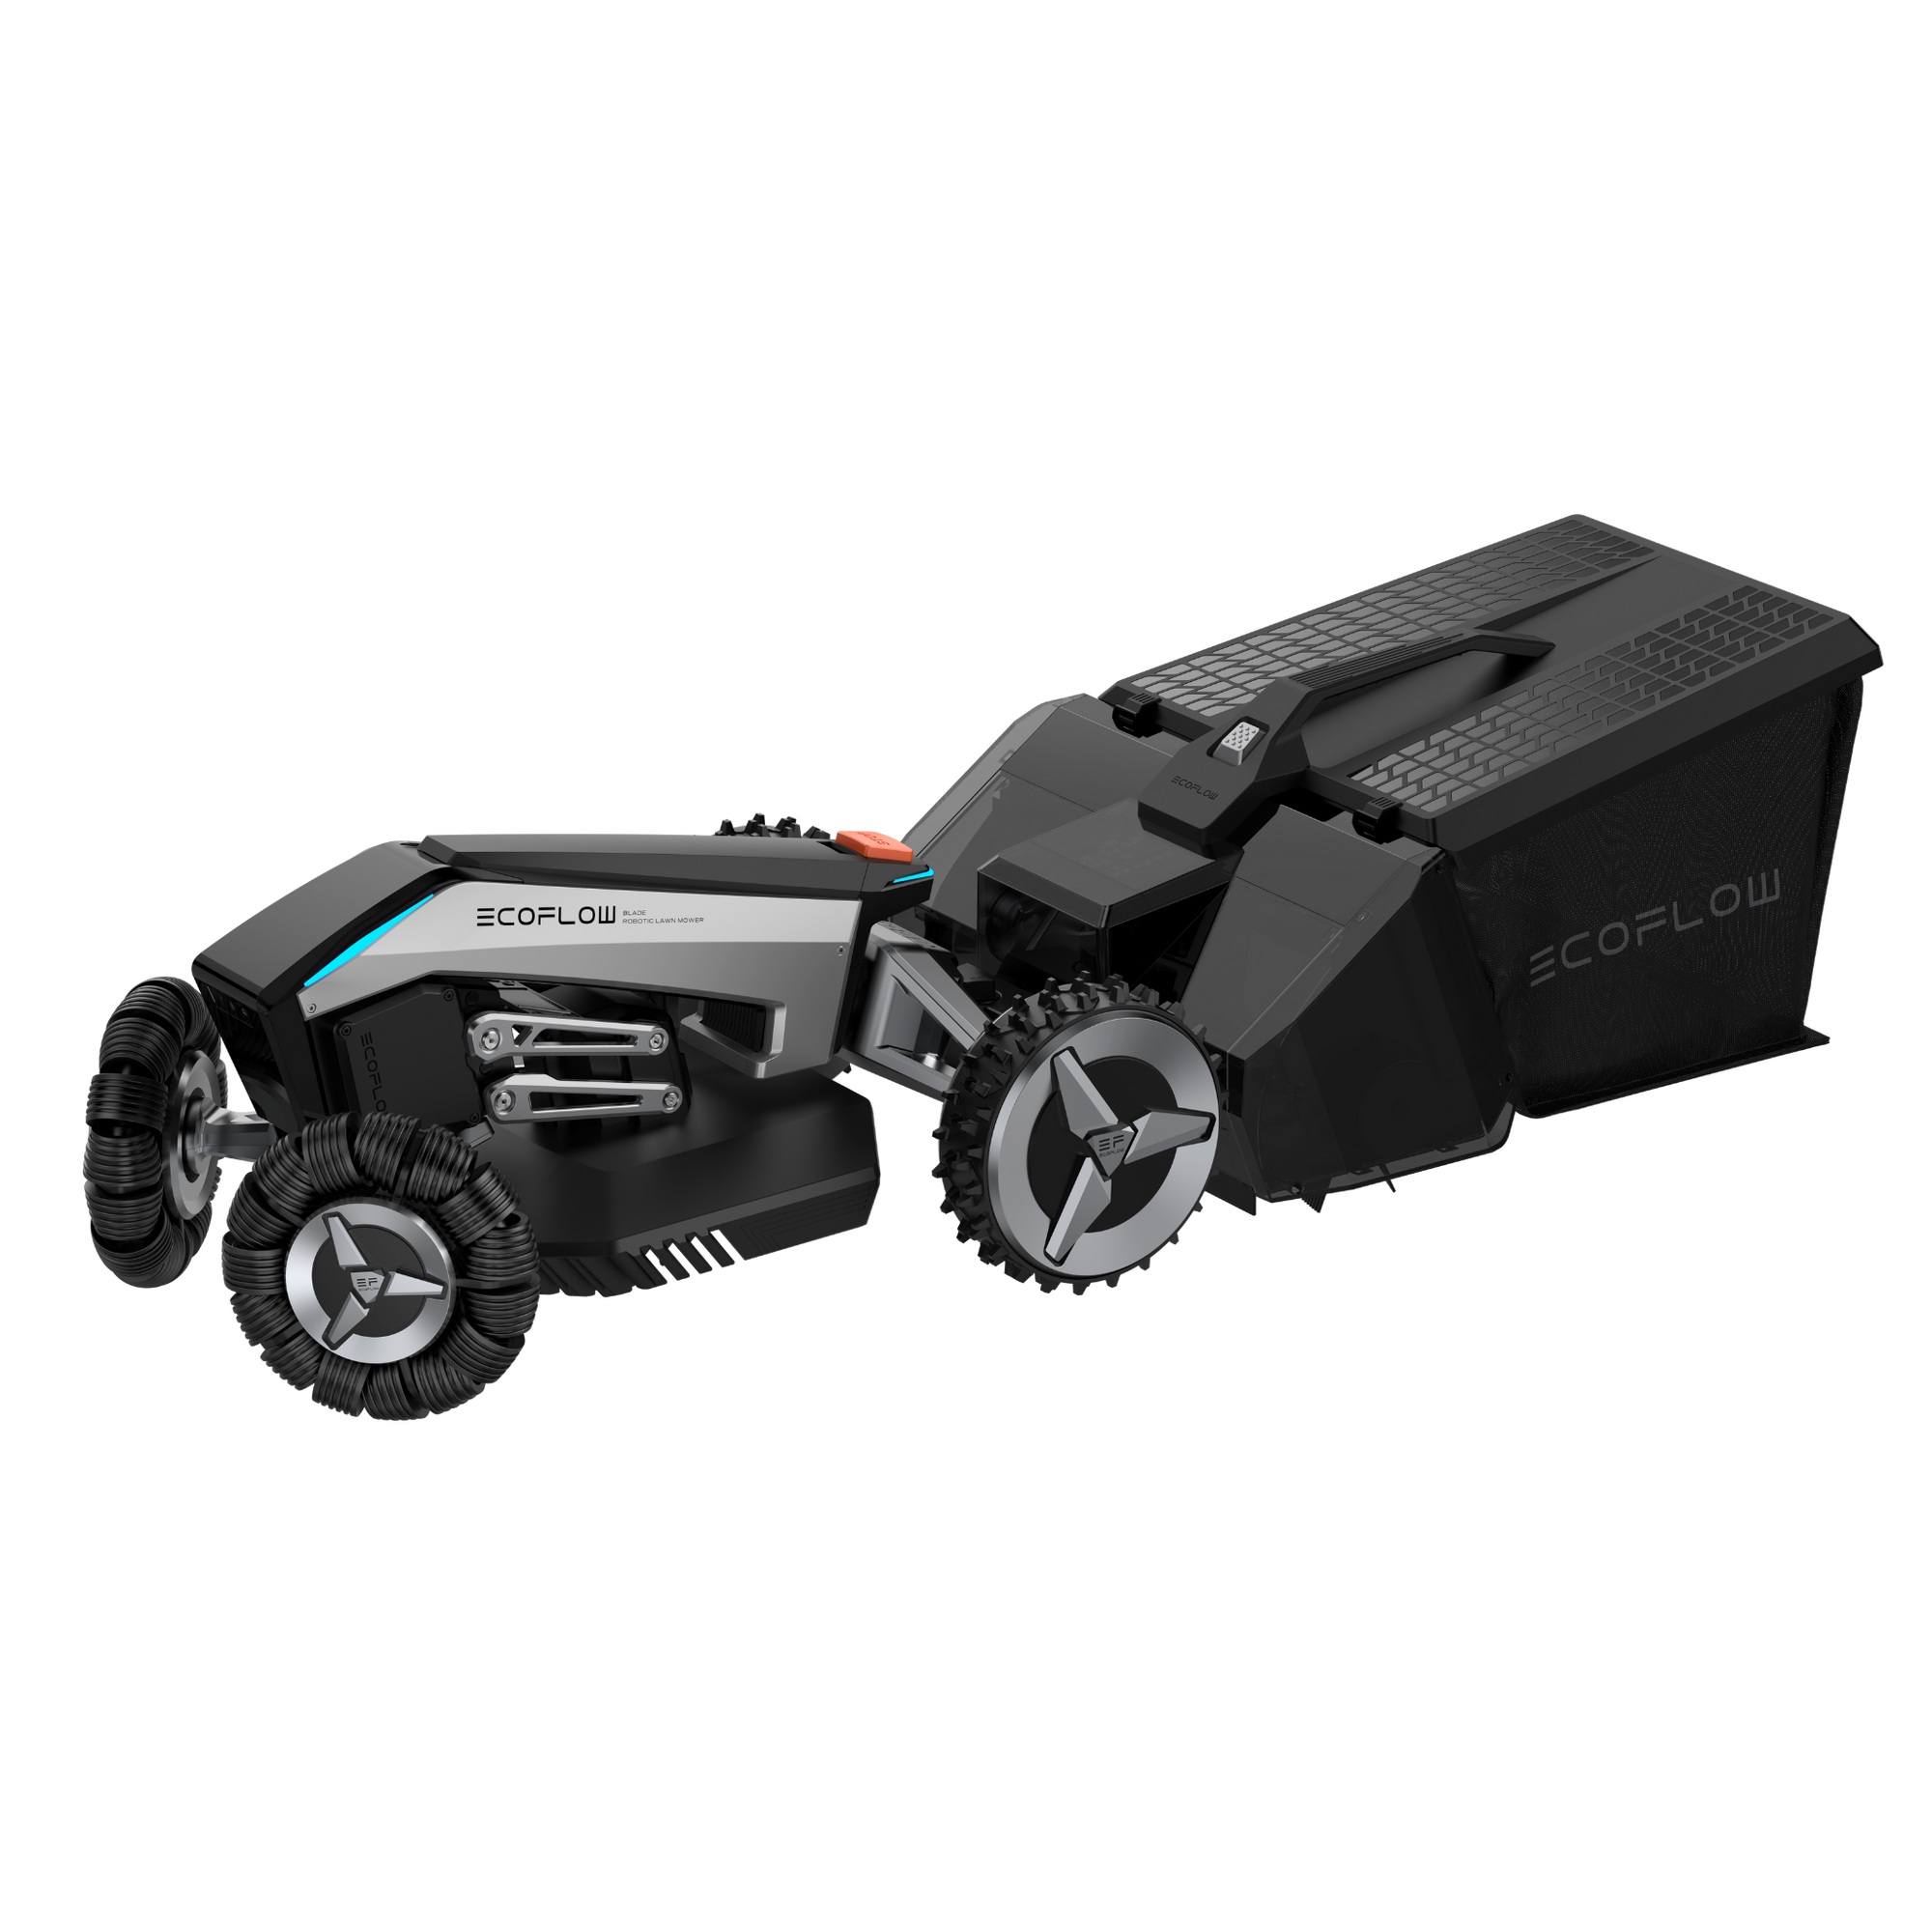 EcoFlow BLADE Robotic Lawn Mower with Lawn Sweeper Kit